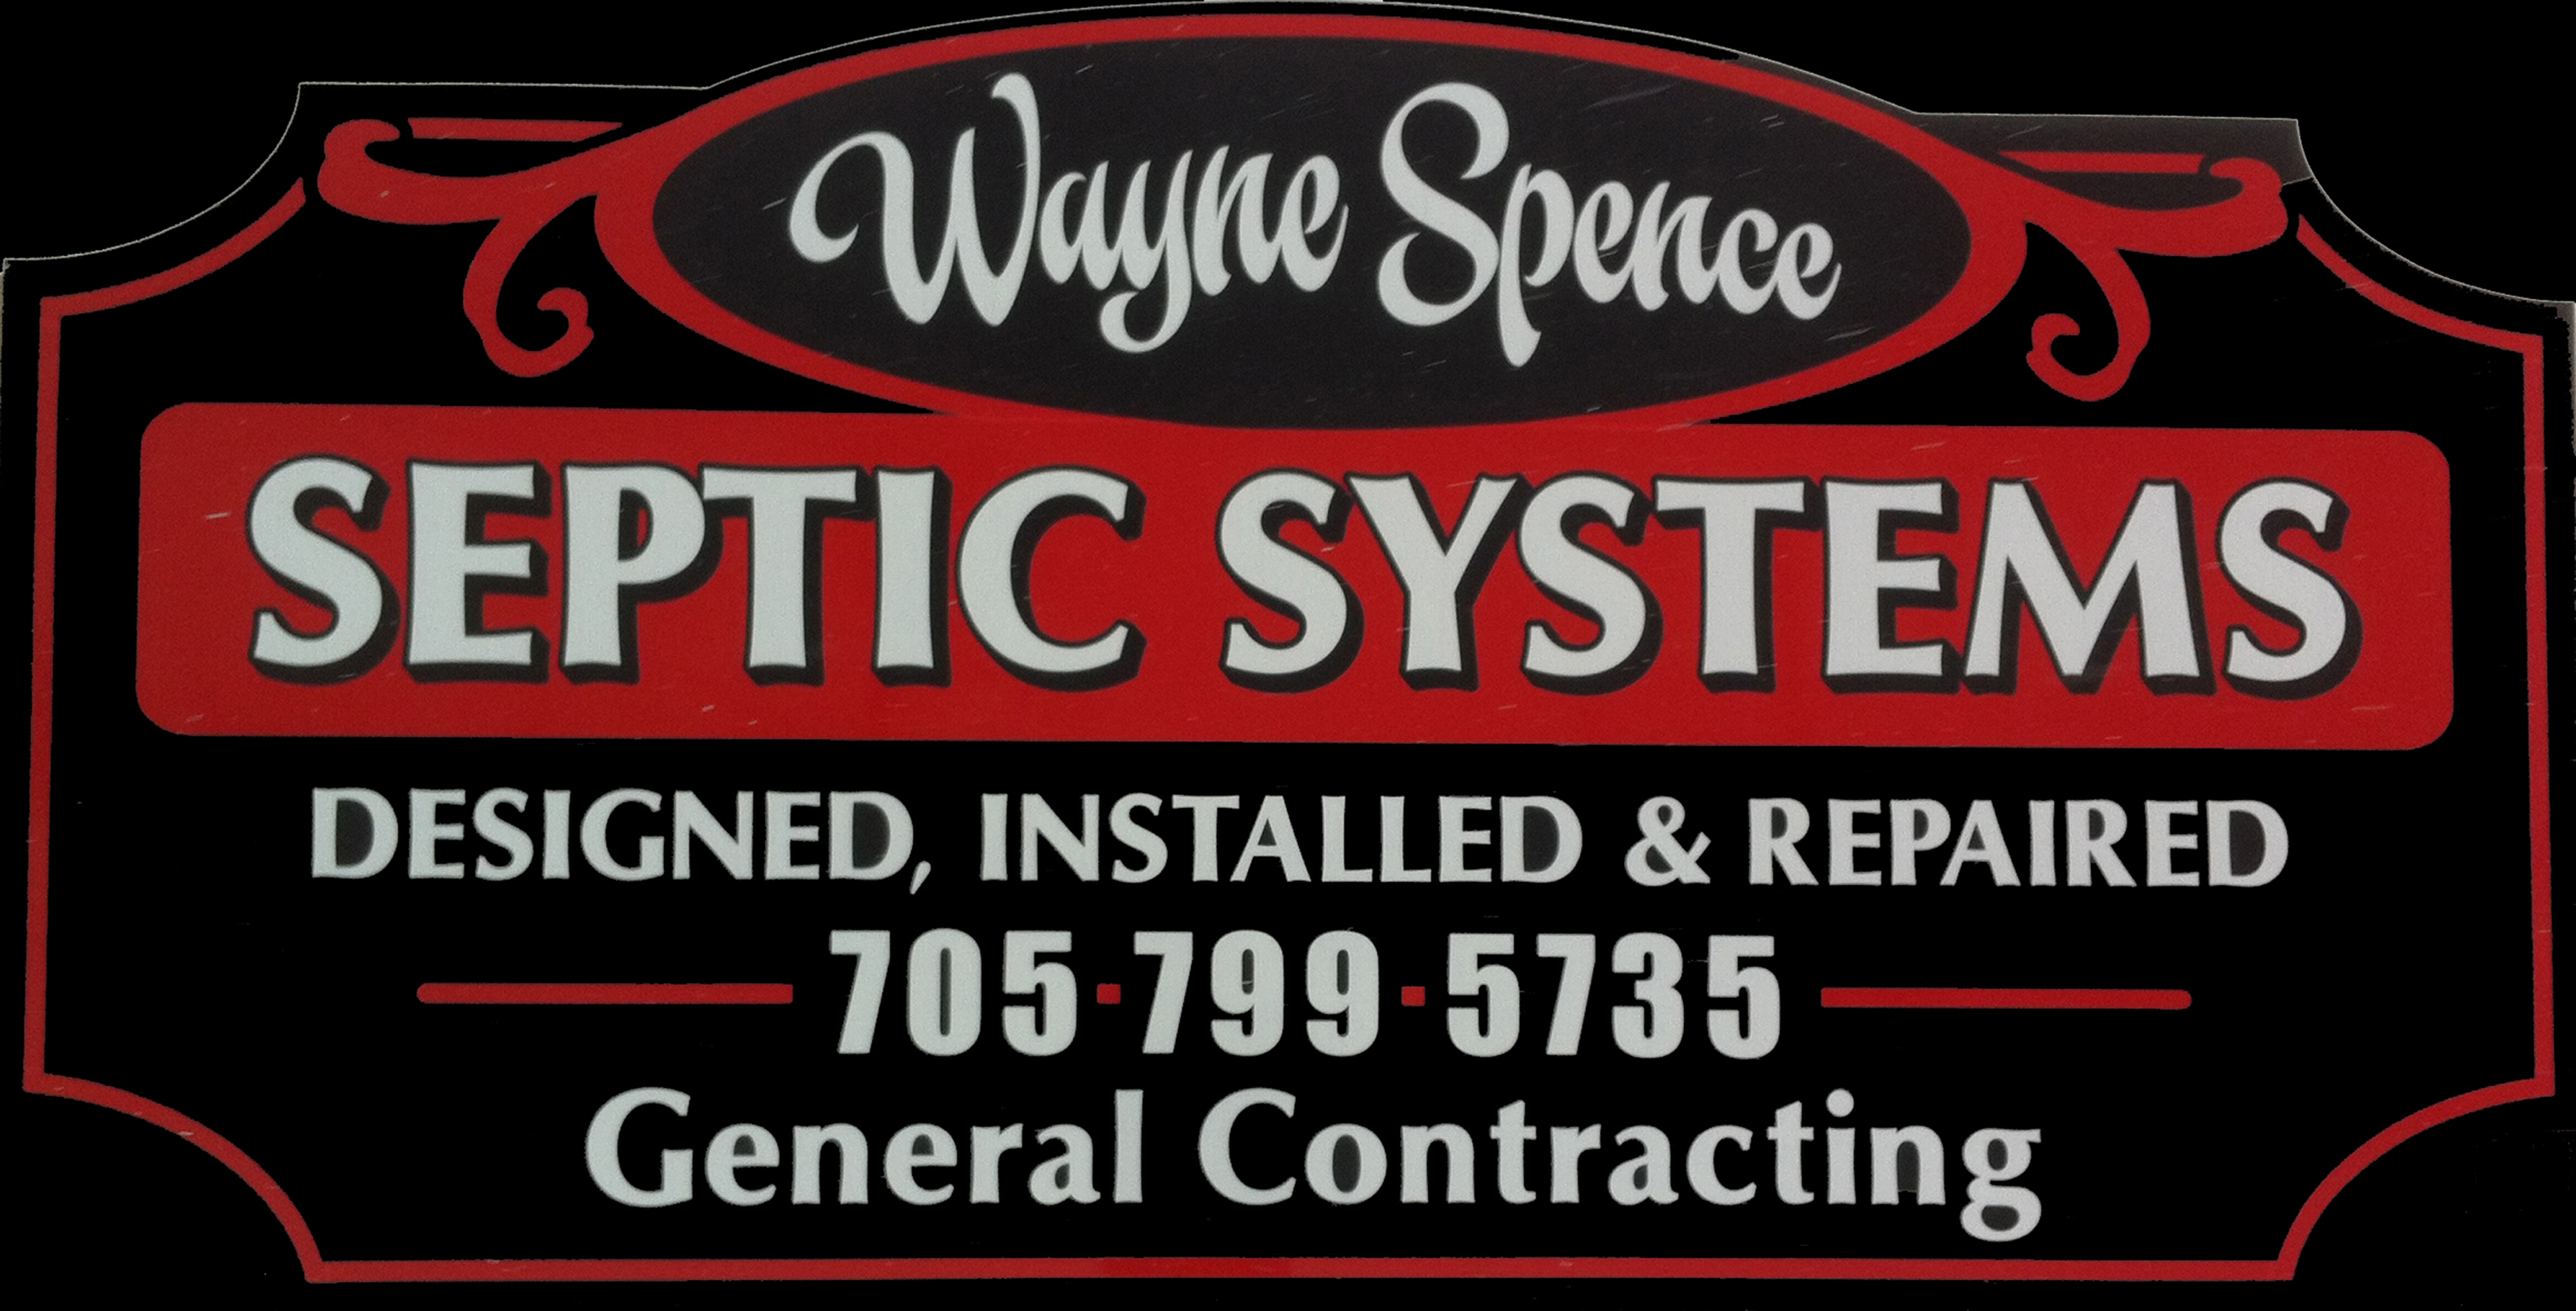 Wayne Spence Septic Systems - Construction Services